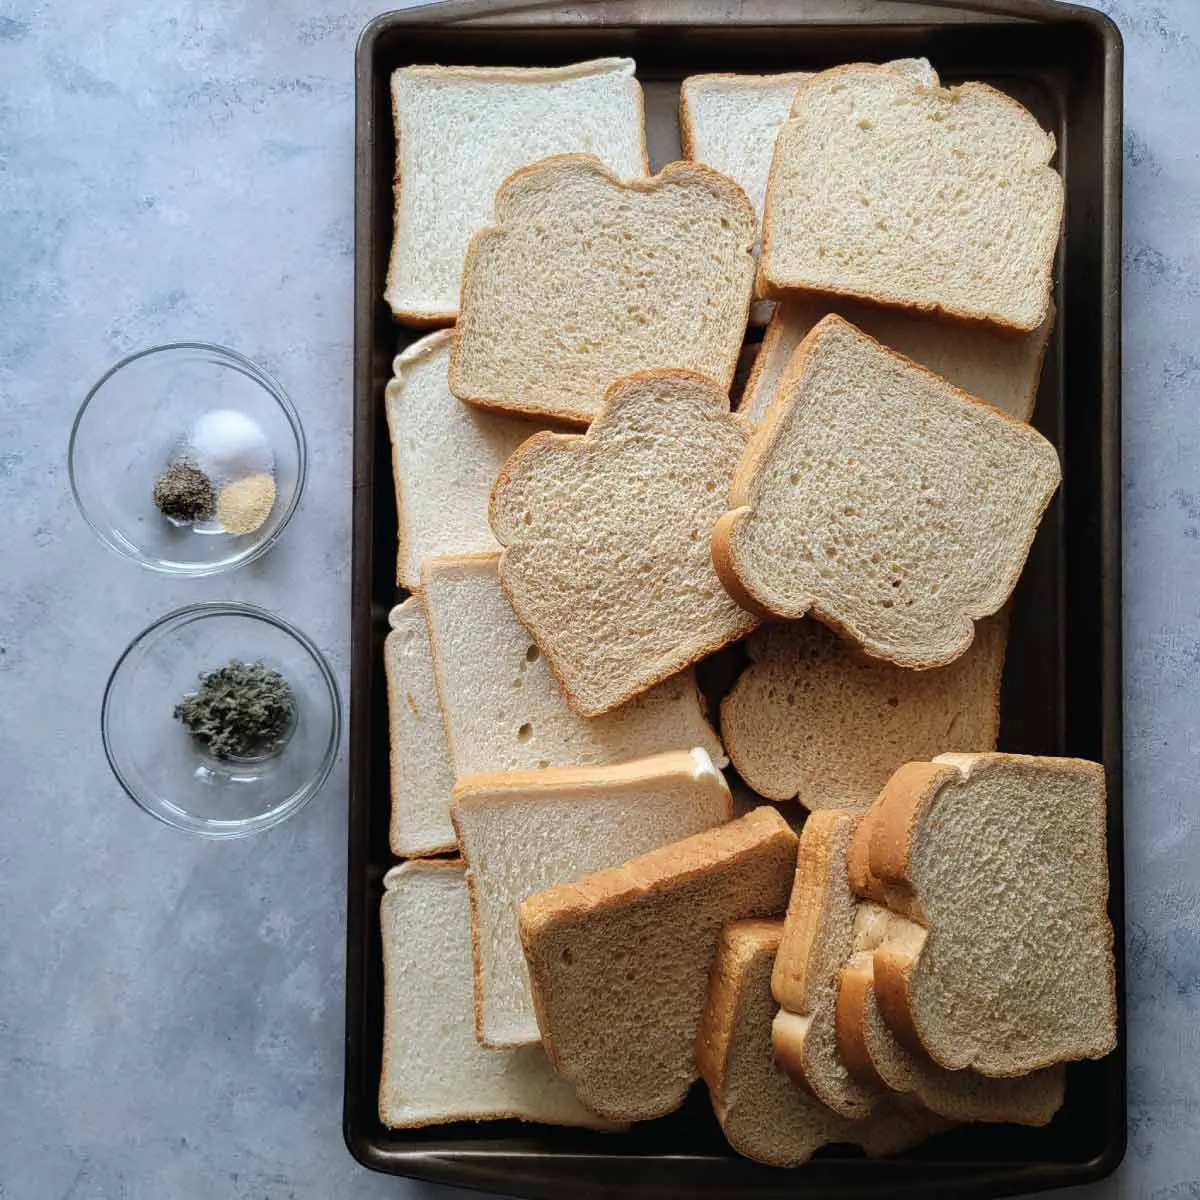 White and wheat bread slices on a baking tray along with the seasonings in prep bowls.